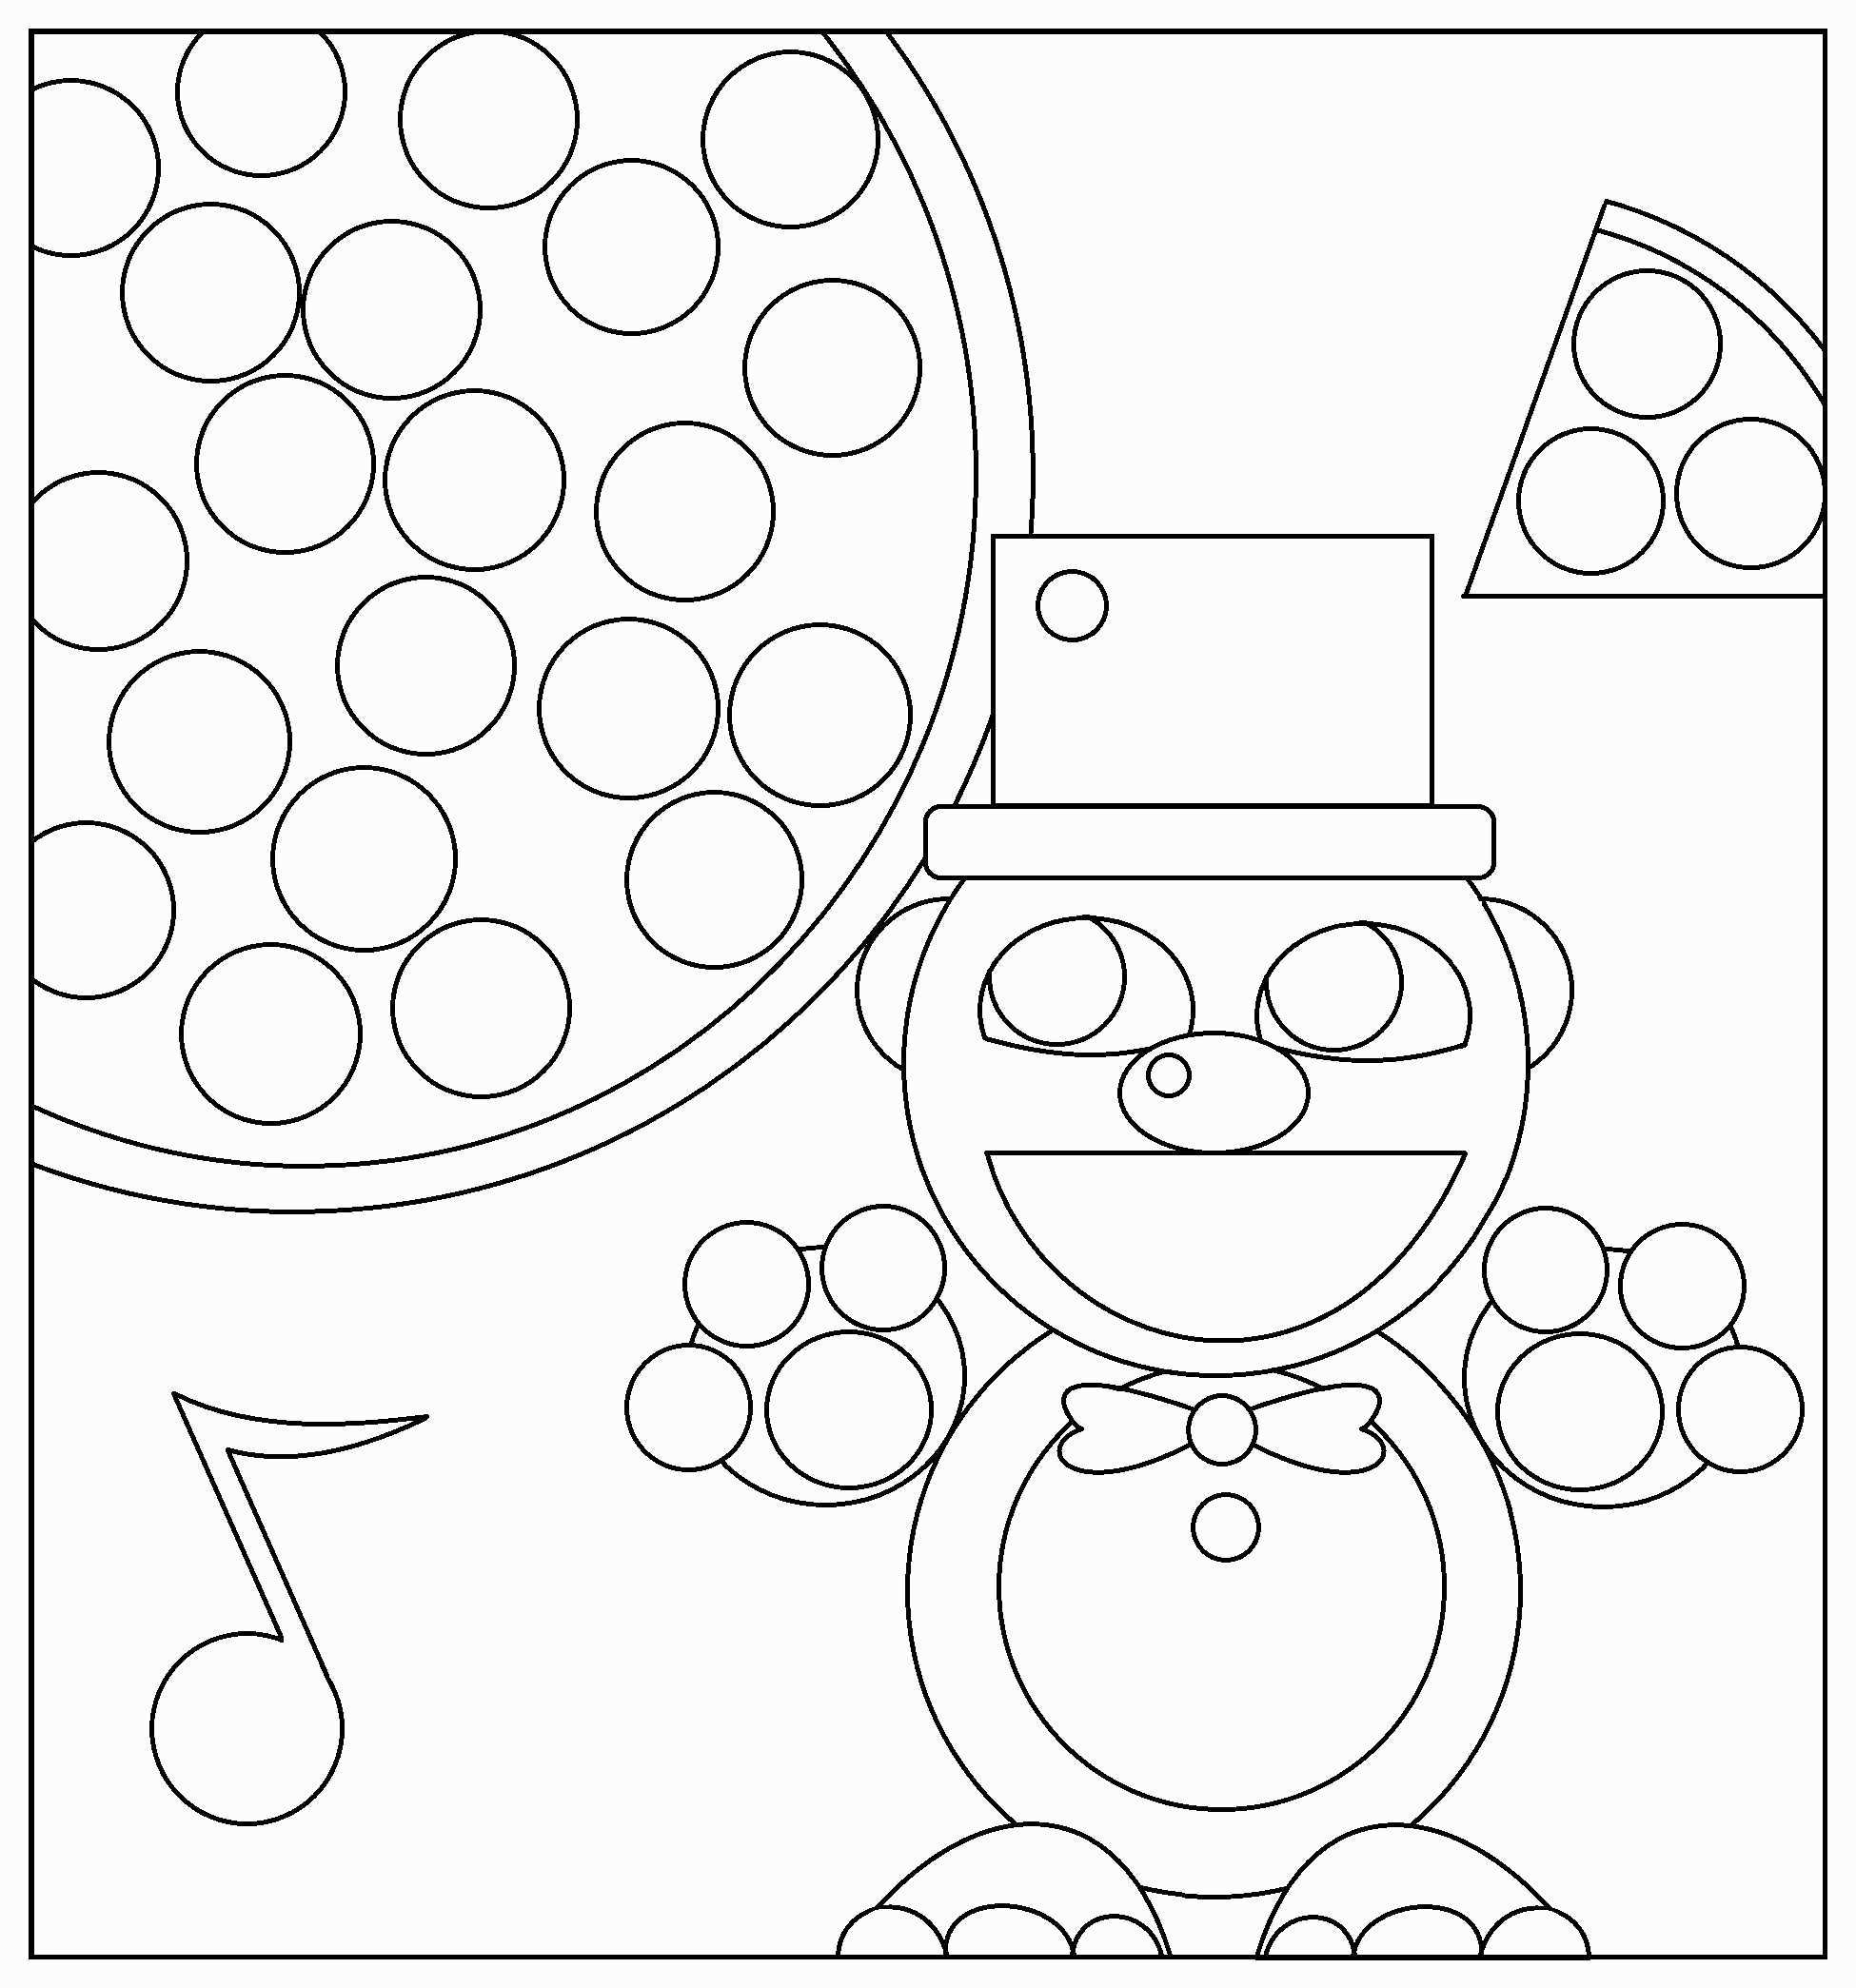 Interactive Coloring Pages Coloring Ideas Interactive Coloring Pages For Adults Beautiful